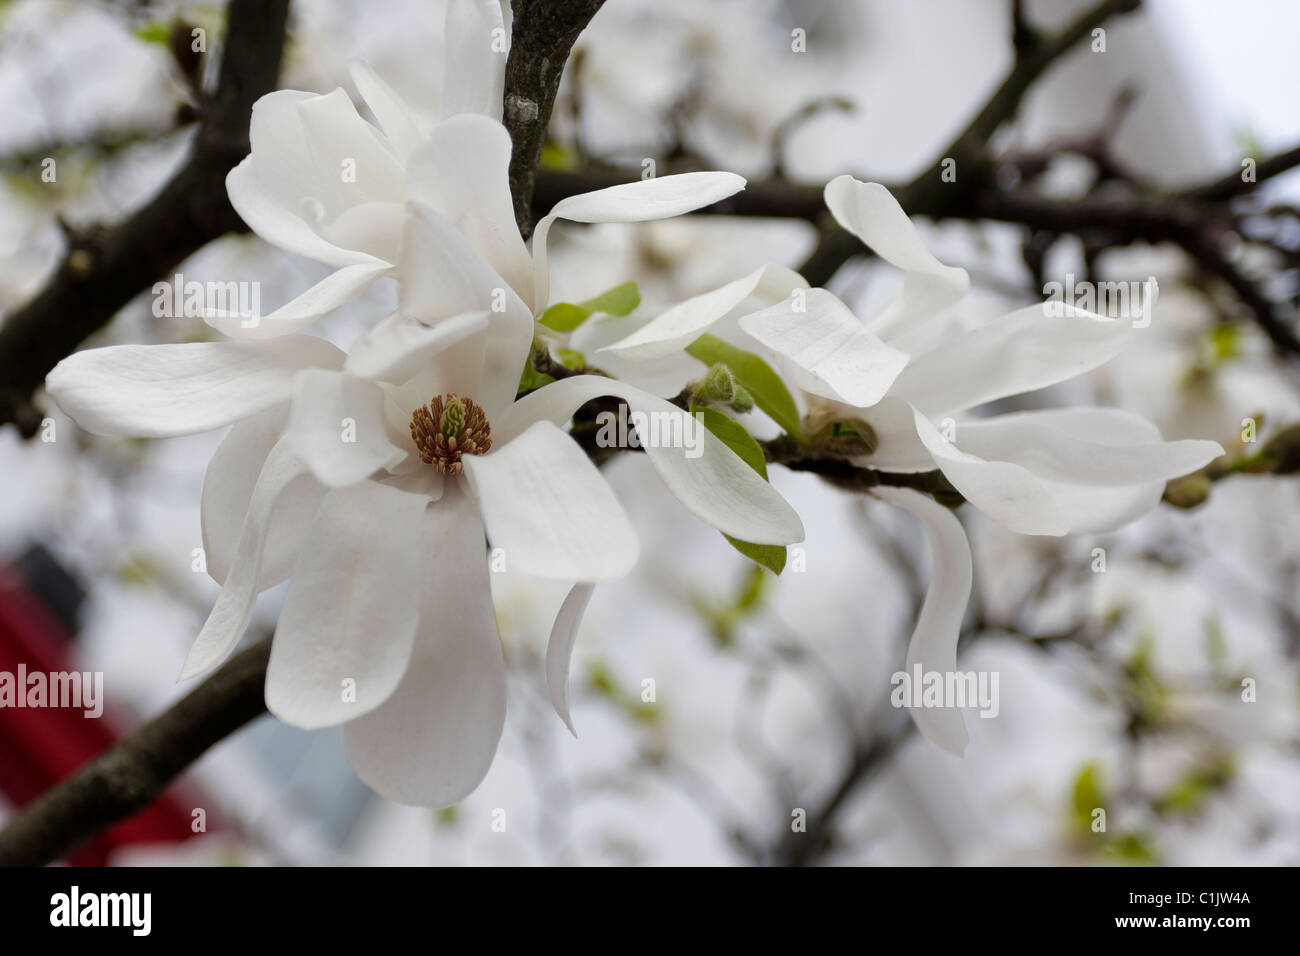 Blooms of white Magnolia Stellata petals during spring in Chelsea, London. Stock Photo